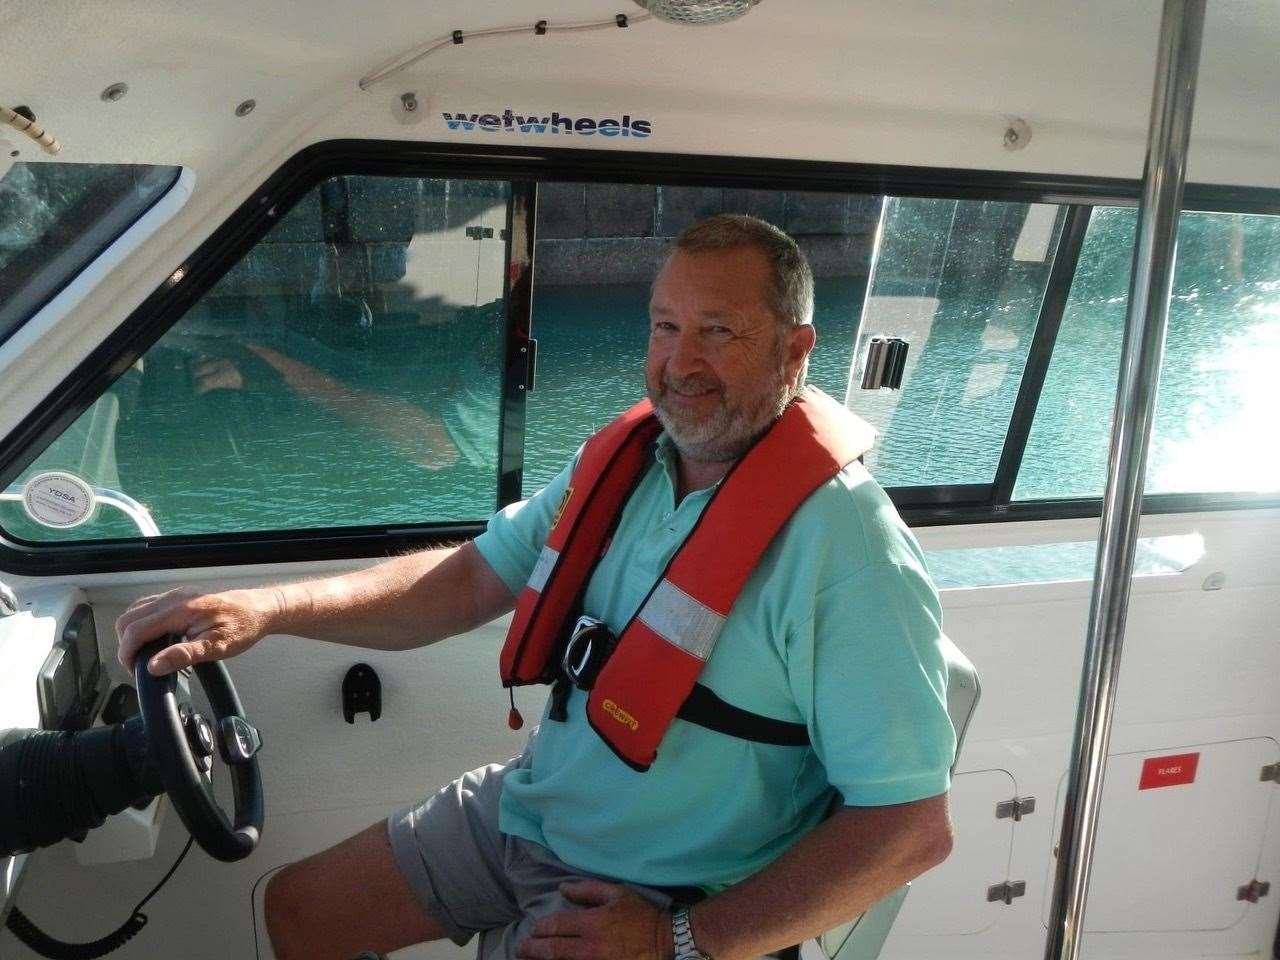 The 60-year-old loved to get out on the water